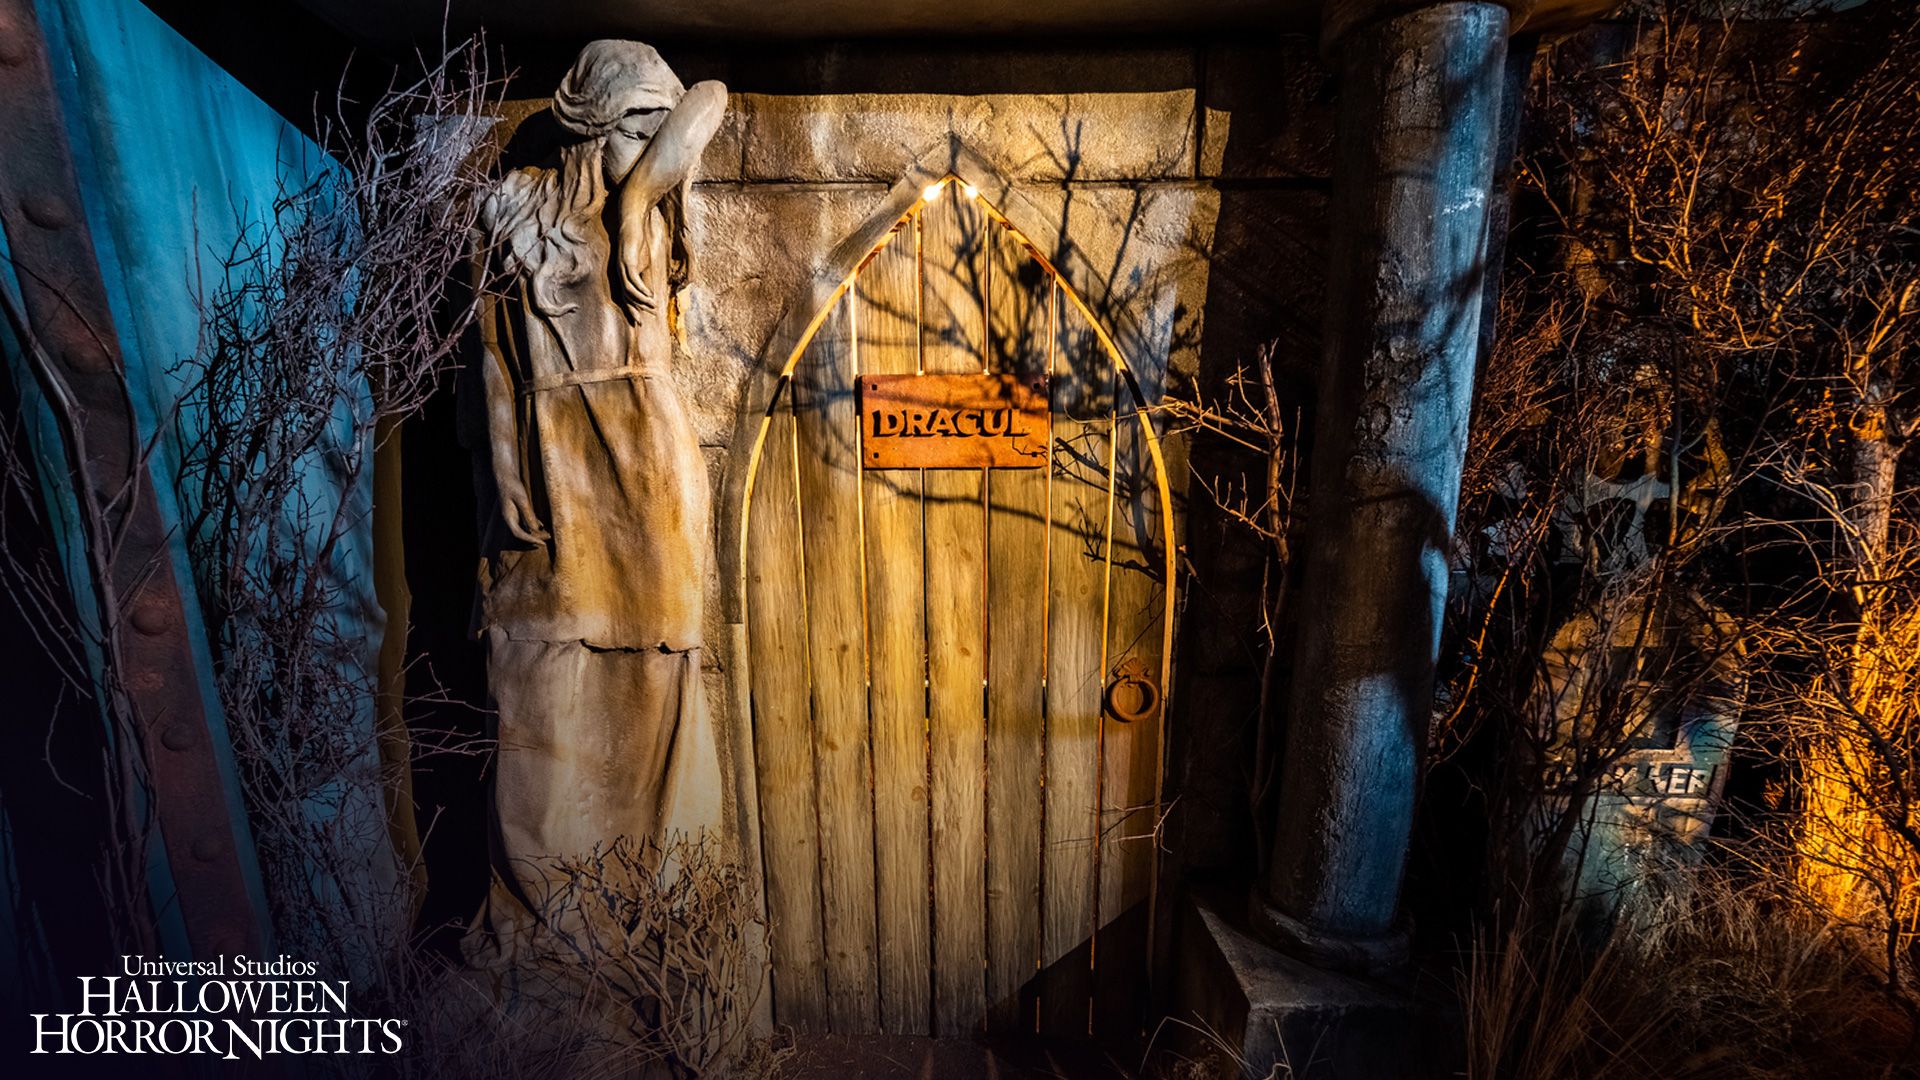 Universal Studios Hollywood Releases Halloween Horror Nights Themed Virtual Background